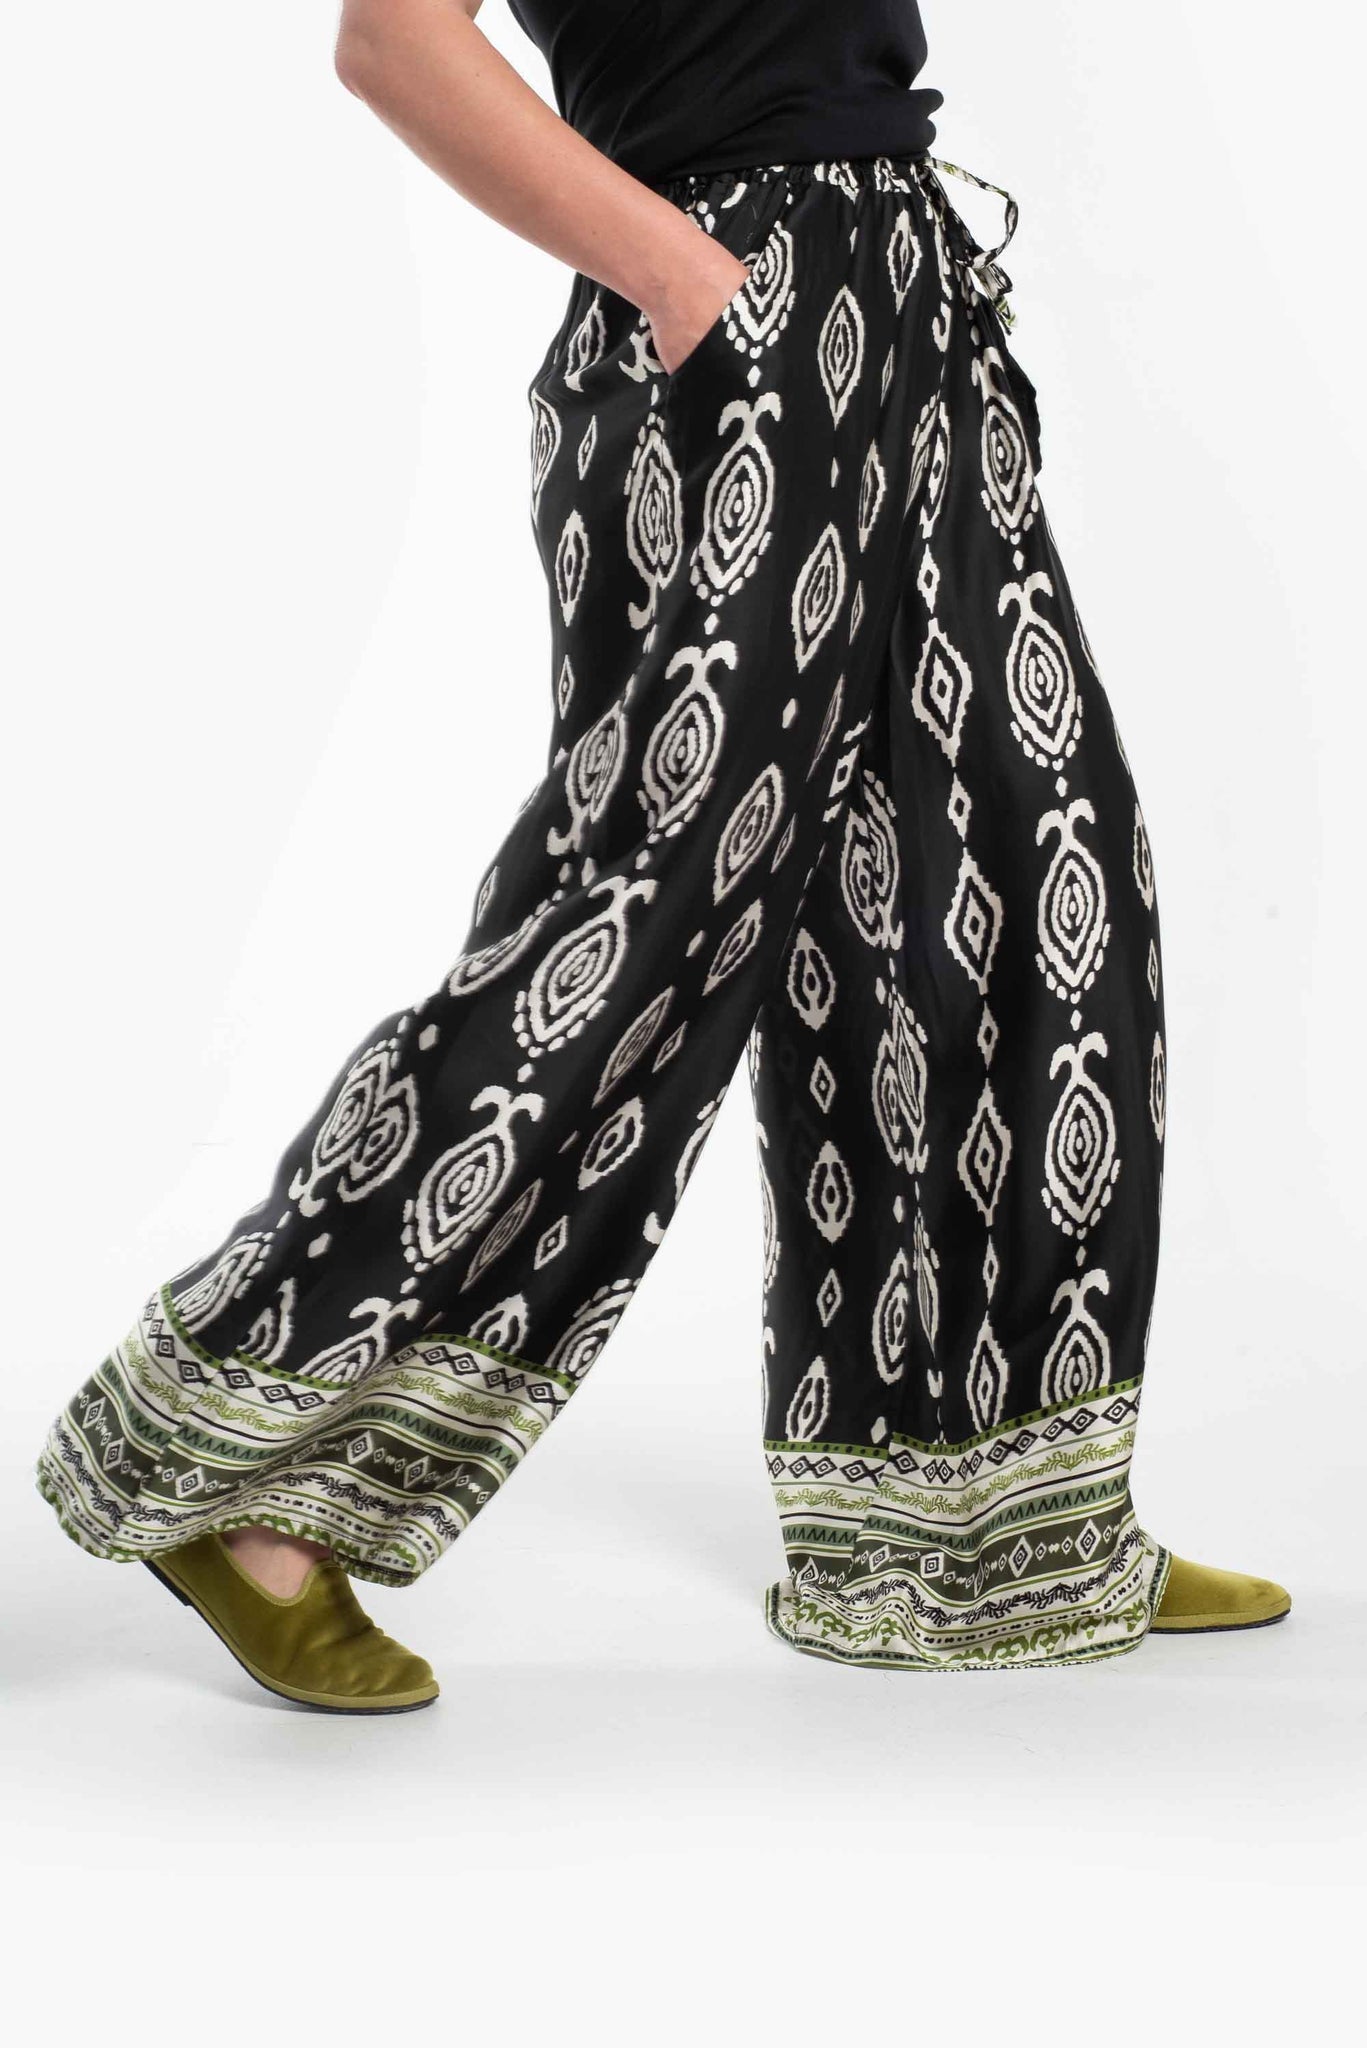 Patterned palazzo trousers